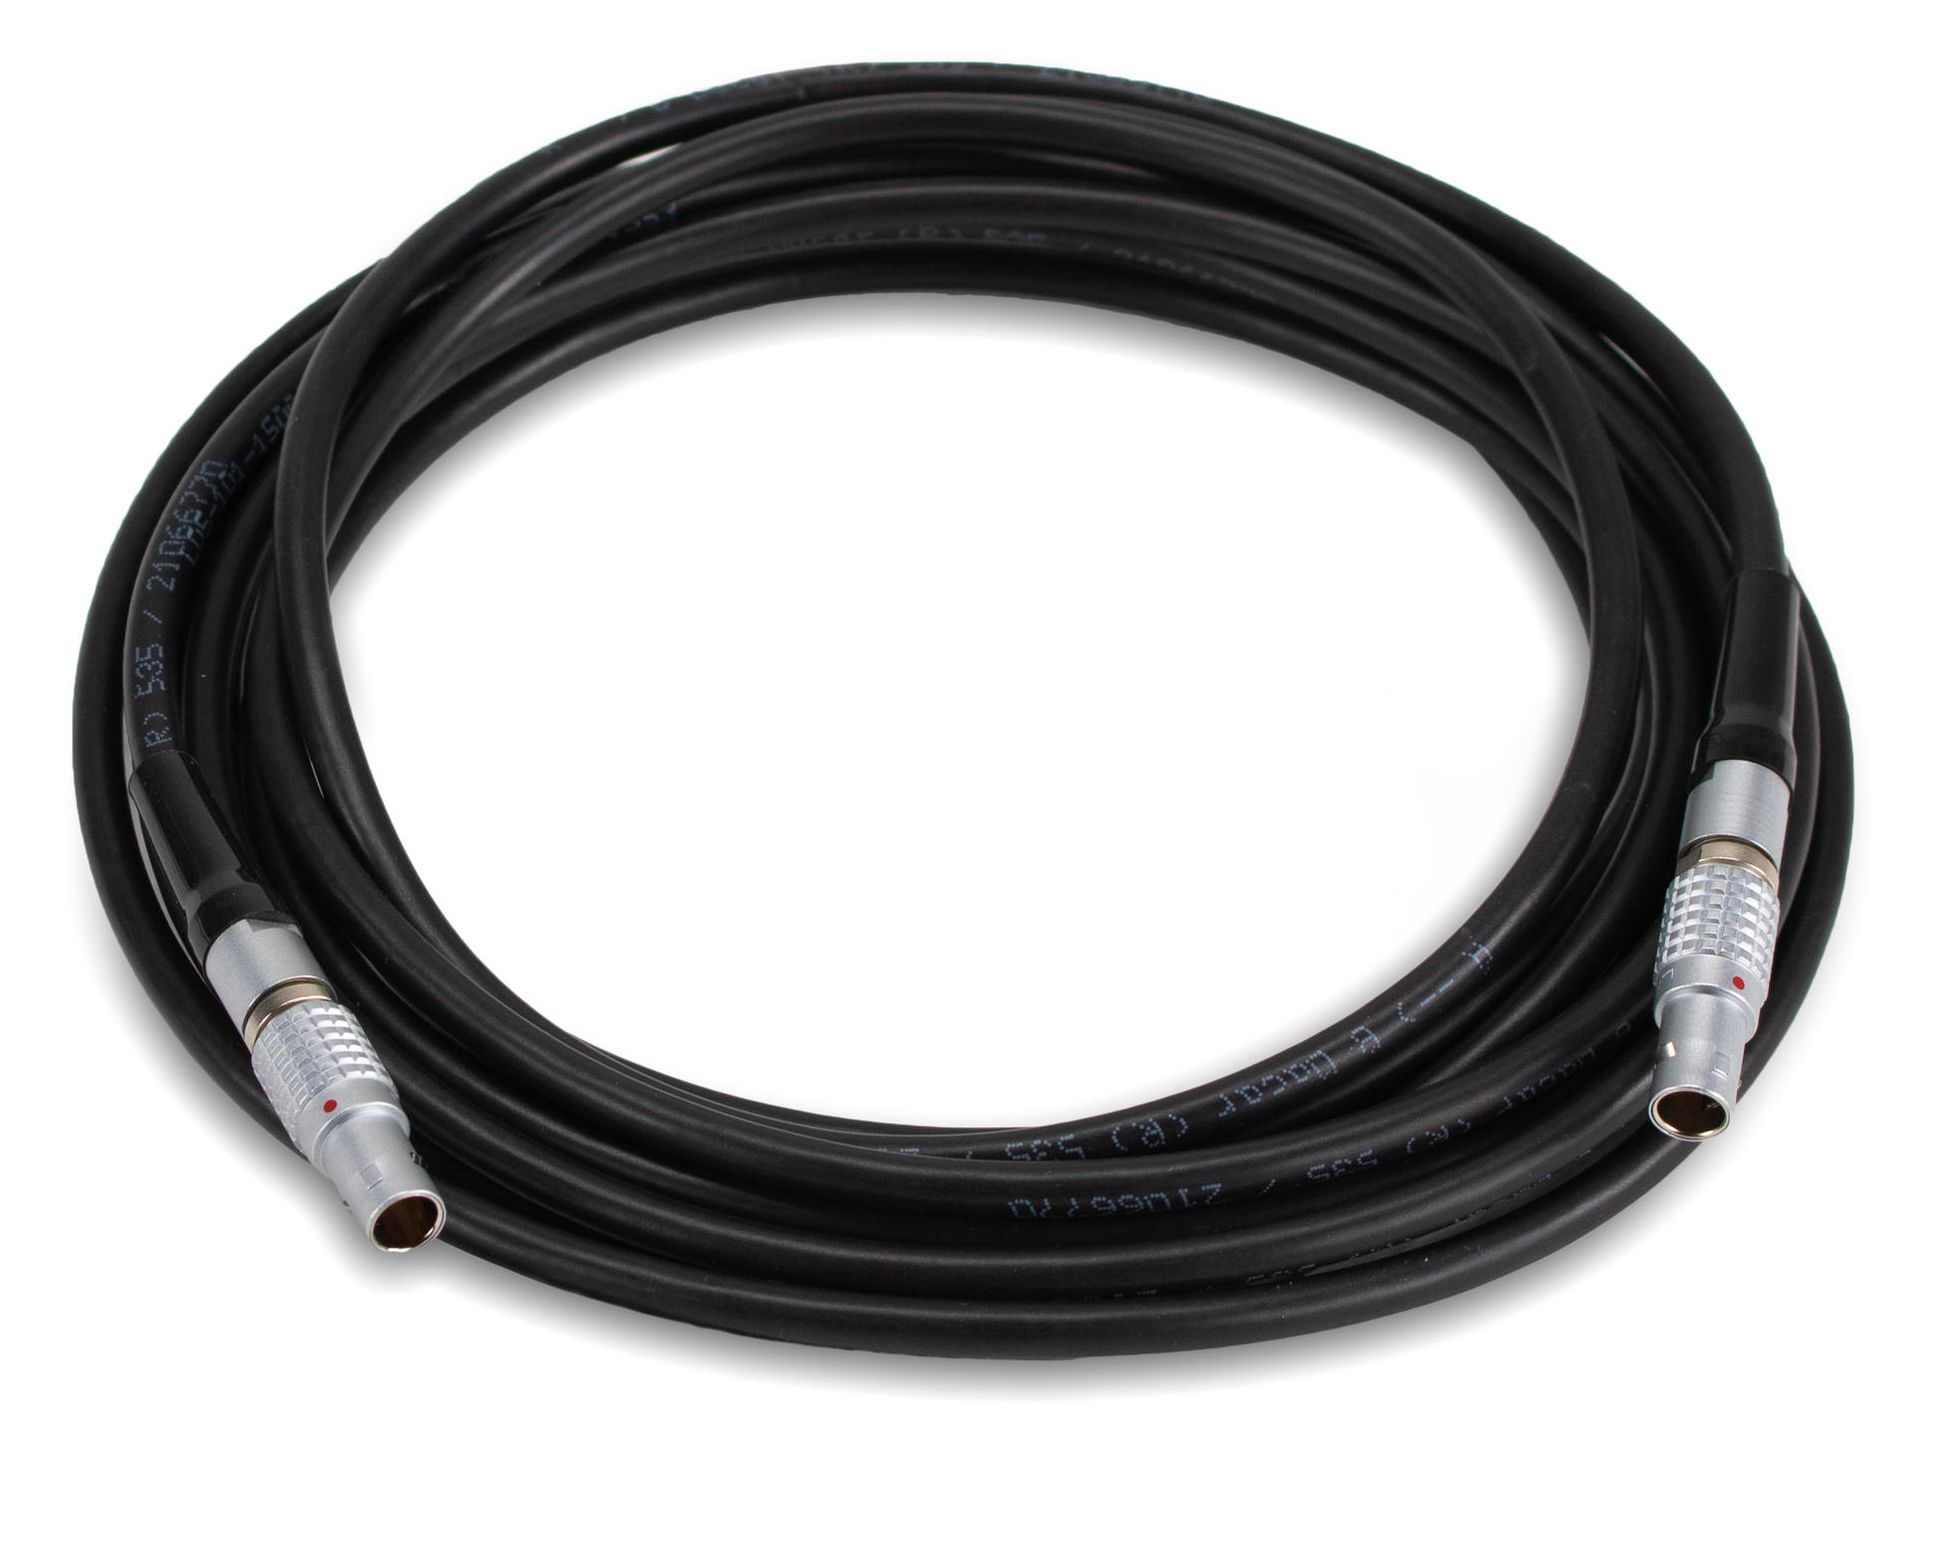 ARRI - Cable for Orbiter Control Panel - 5m / 16,4 ft.